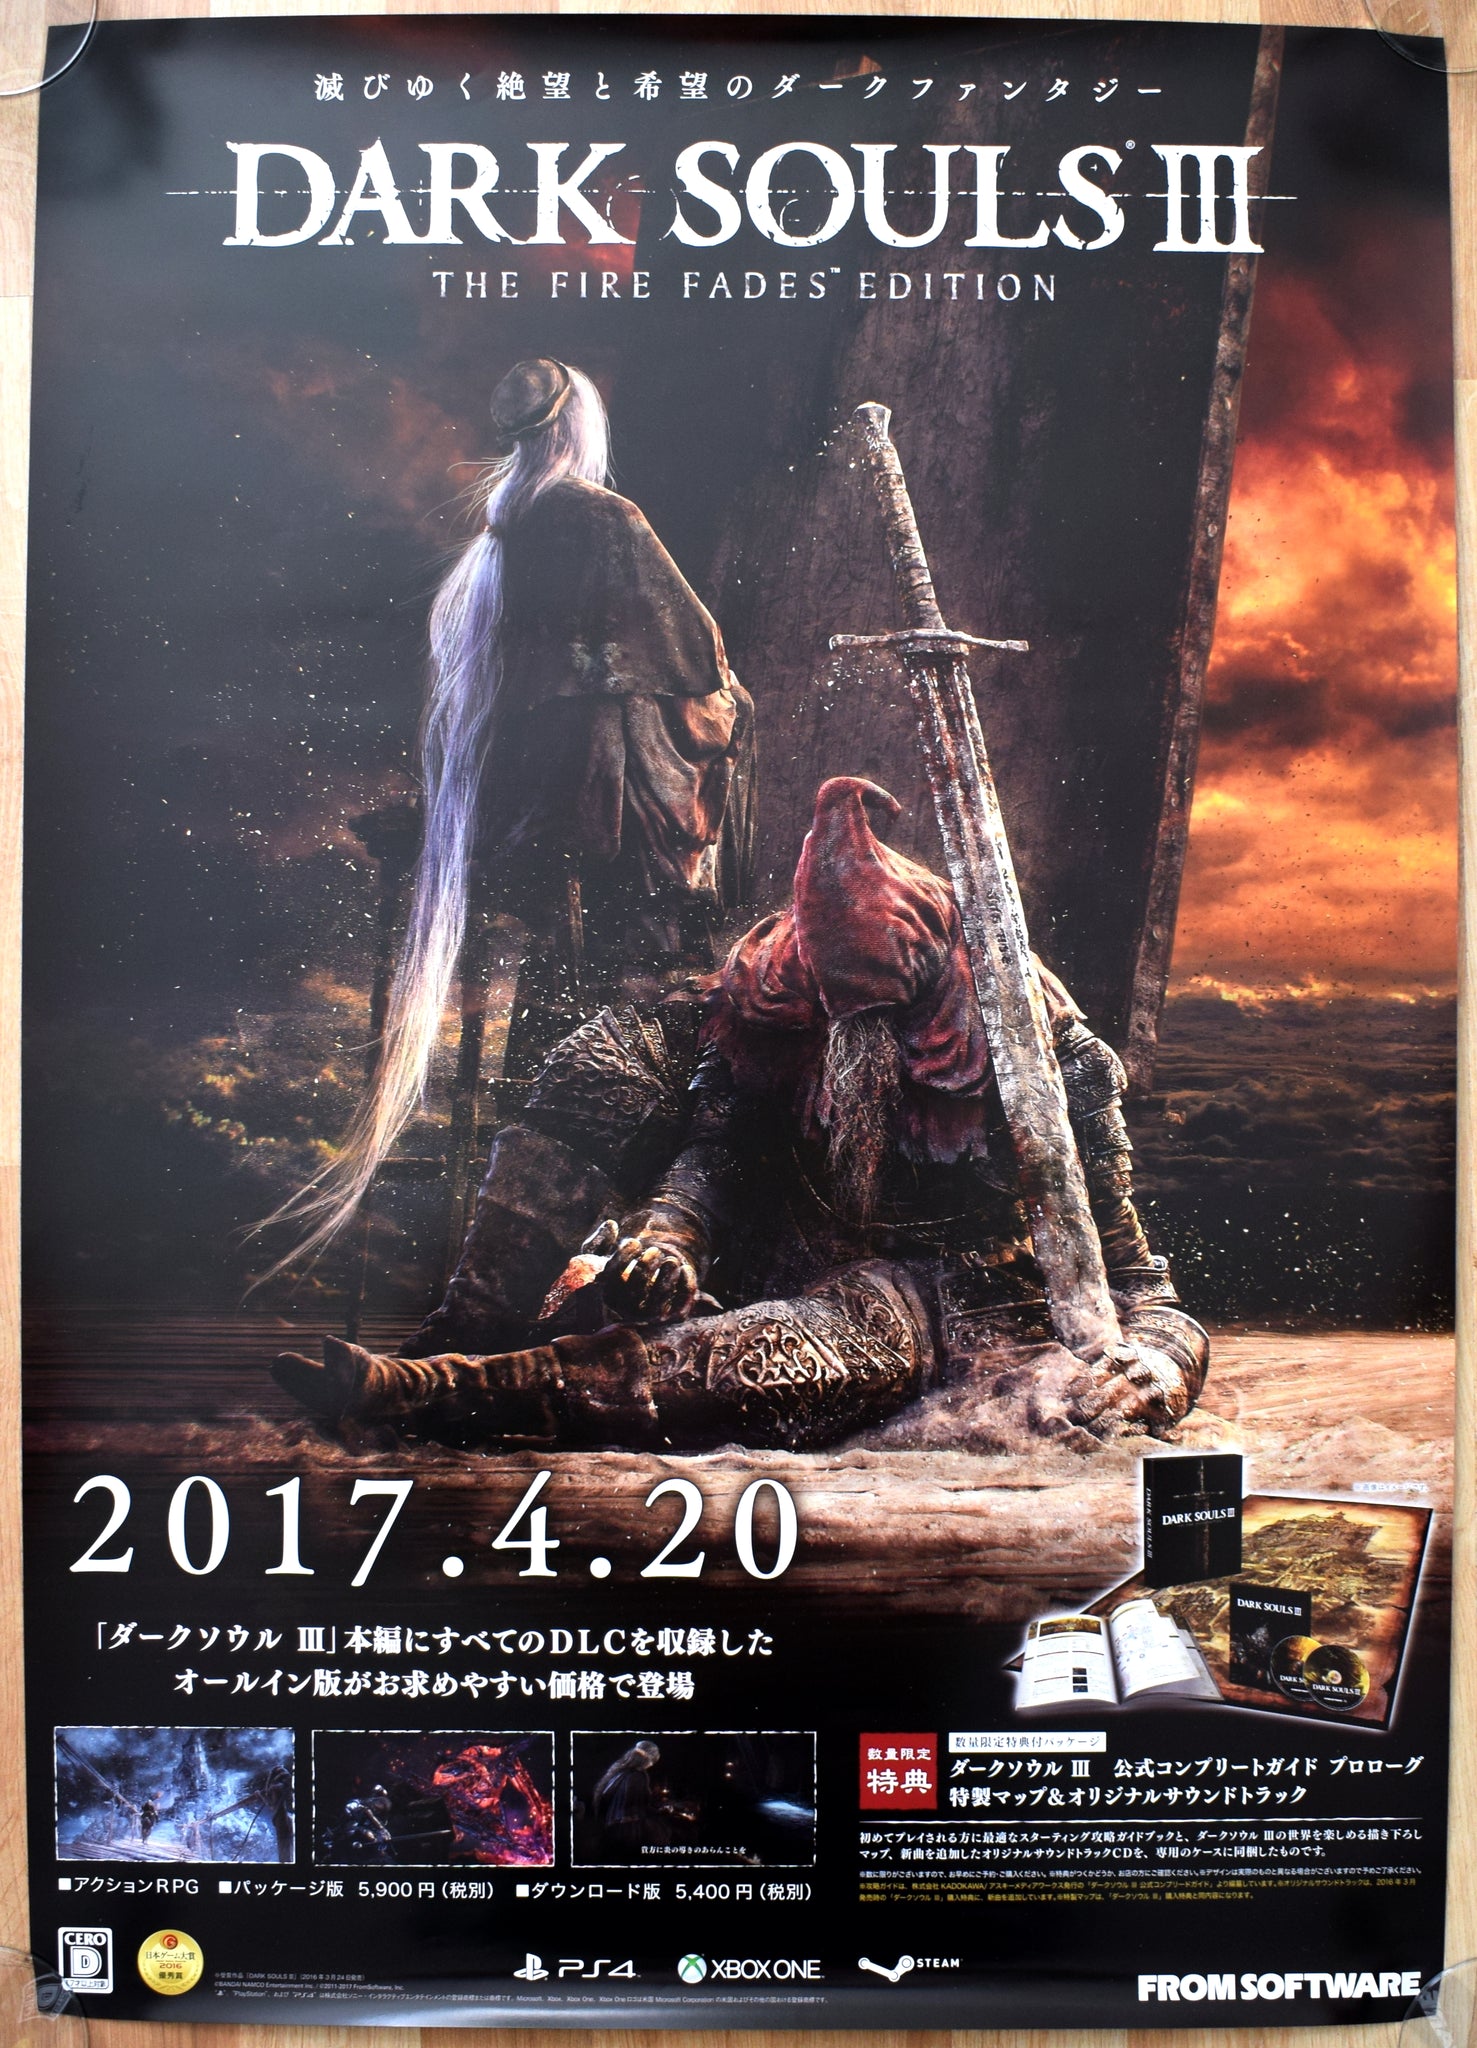 Dark Souls III: The Fire Fades Edition (B2) Japanese Promotional Poster